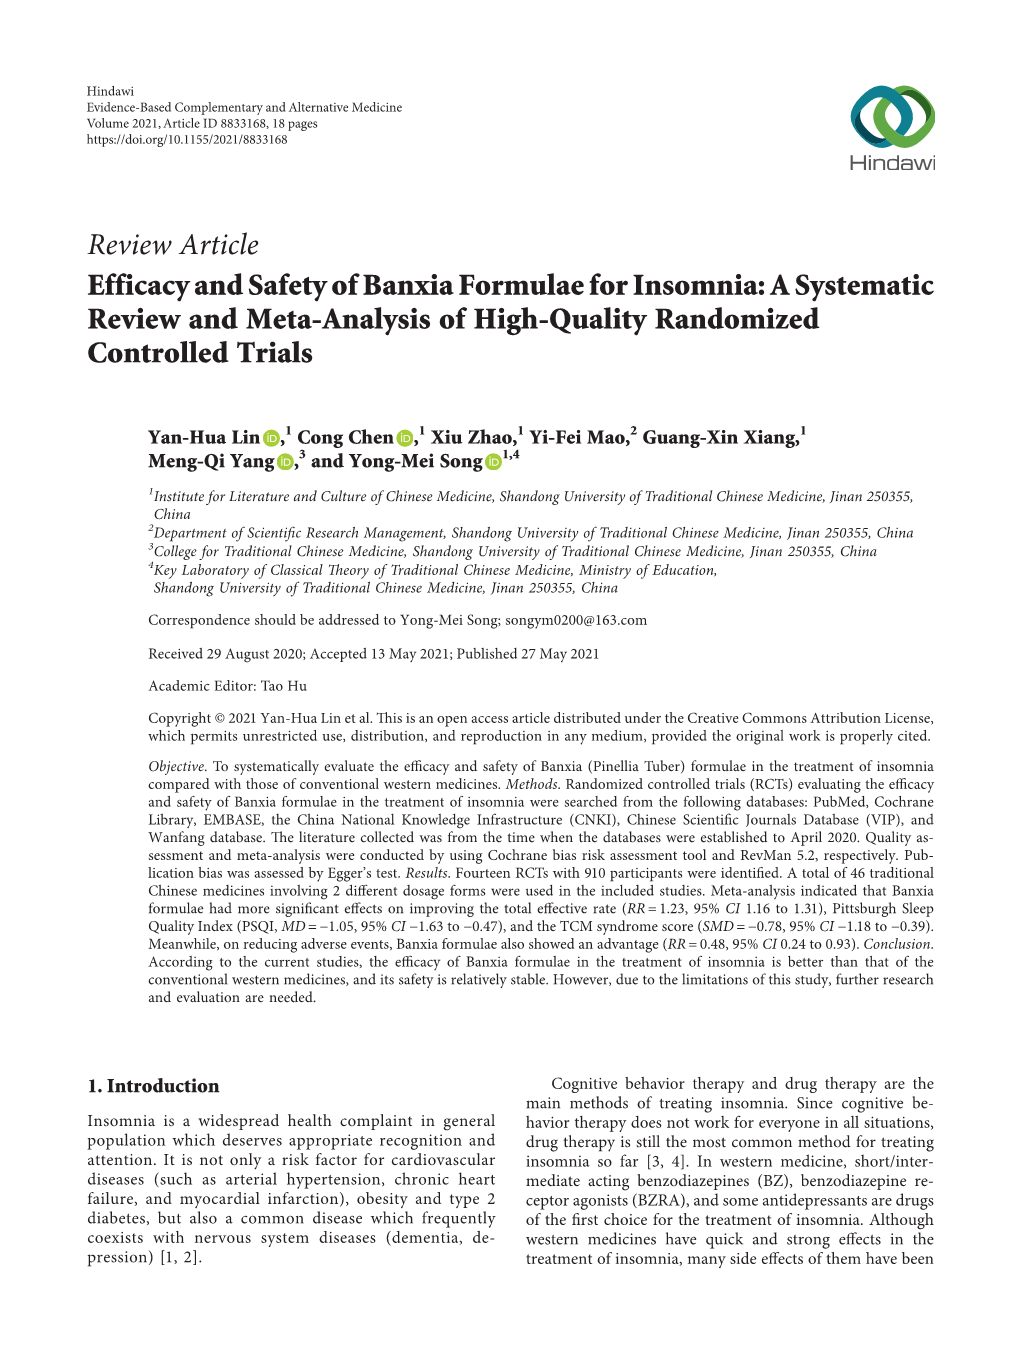 Efficacy and Safety of Banxia Formulae for Insomnia: a Systematic Review and Meta-Analysis of High-Quality Randomized Controlled Trials